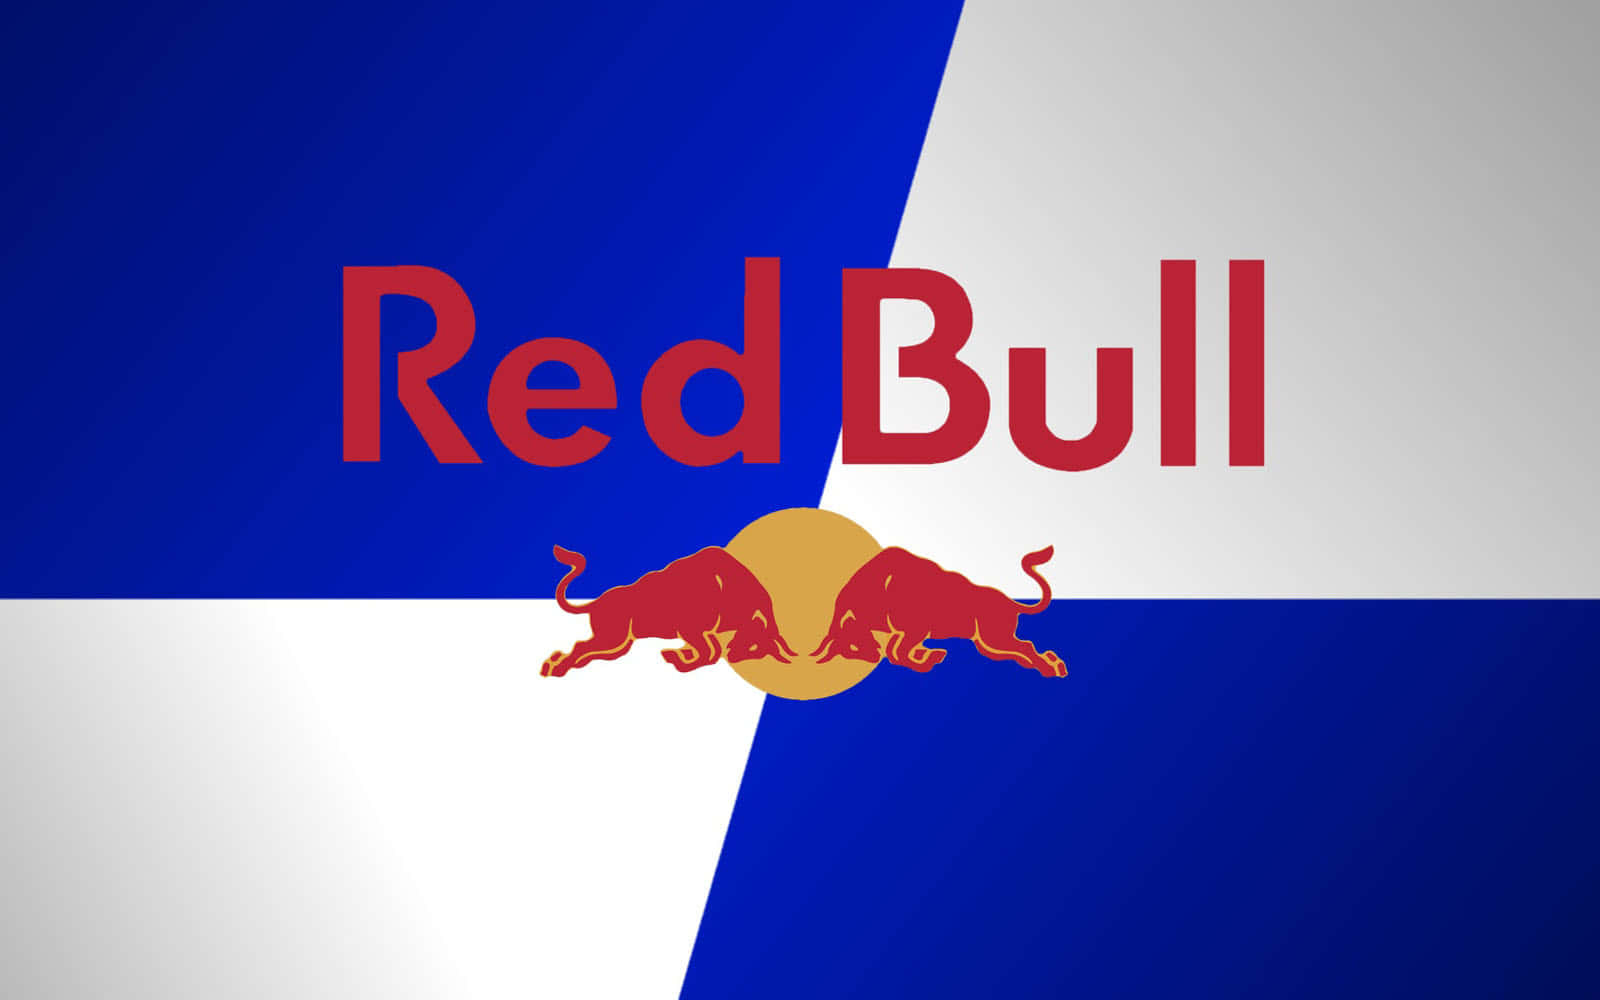 This is the official Red Bull logo.